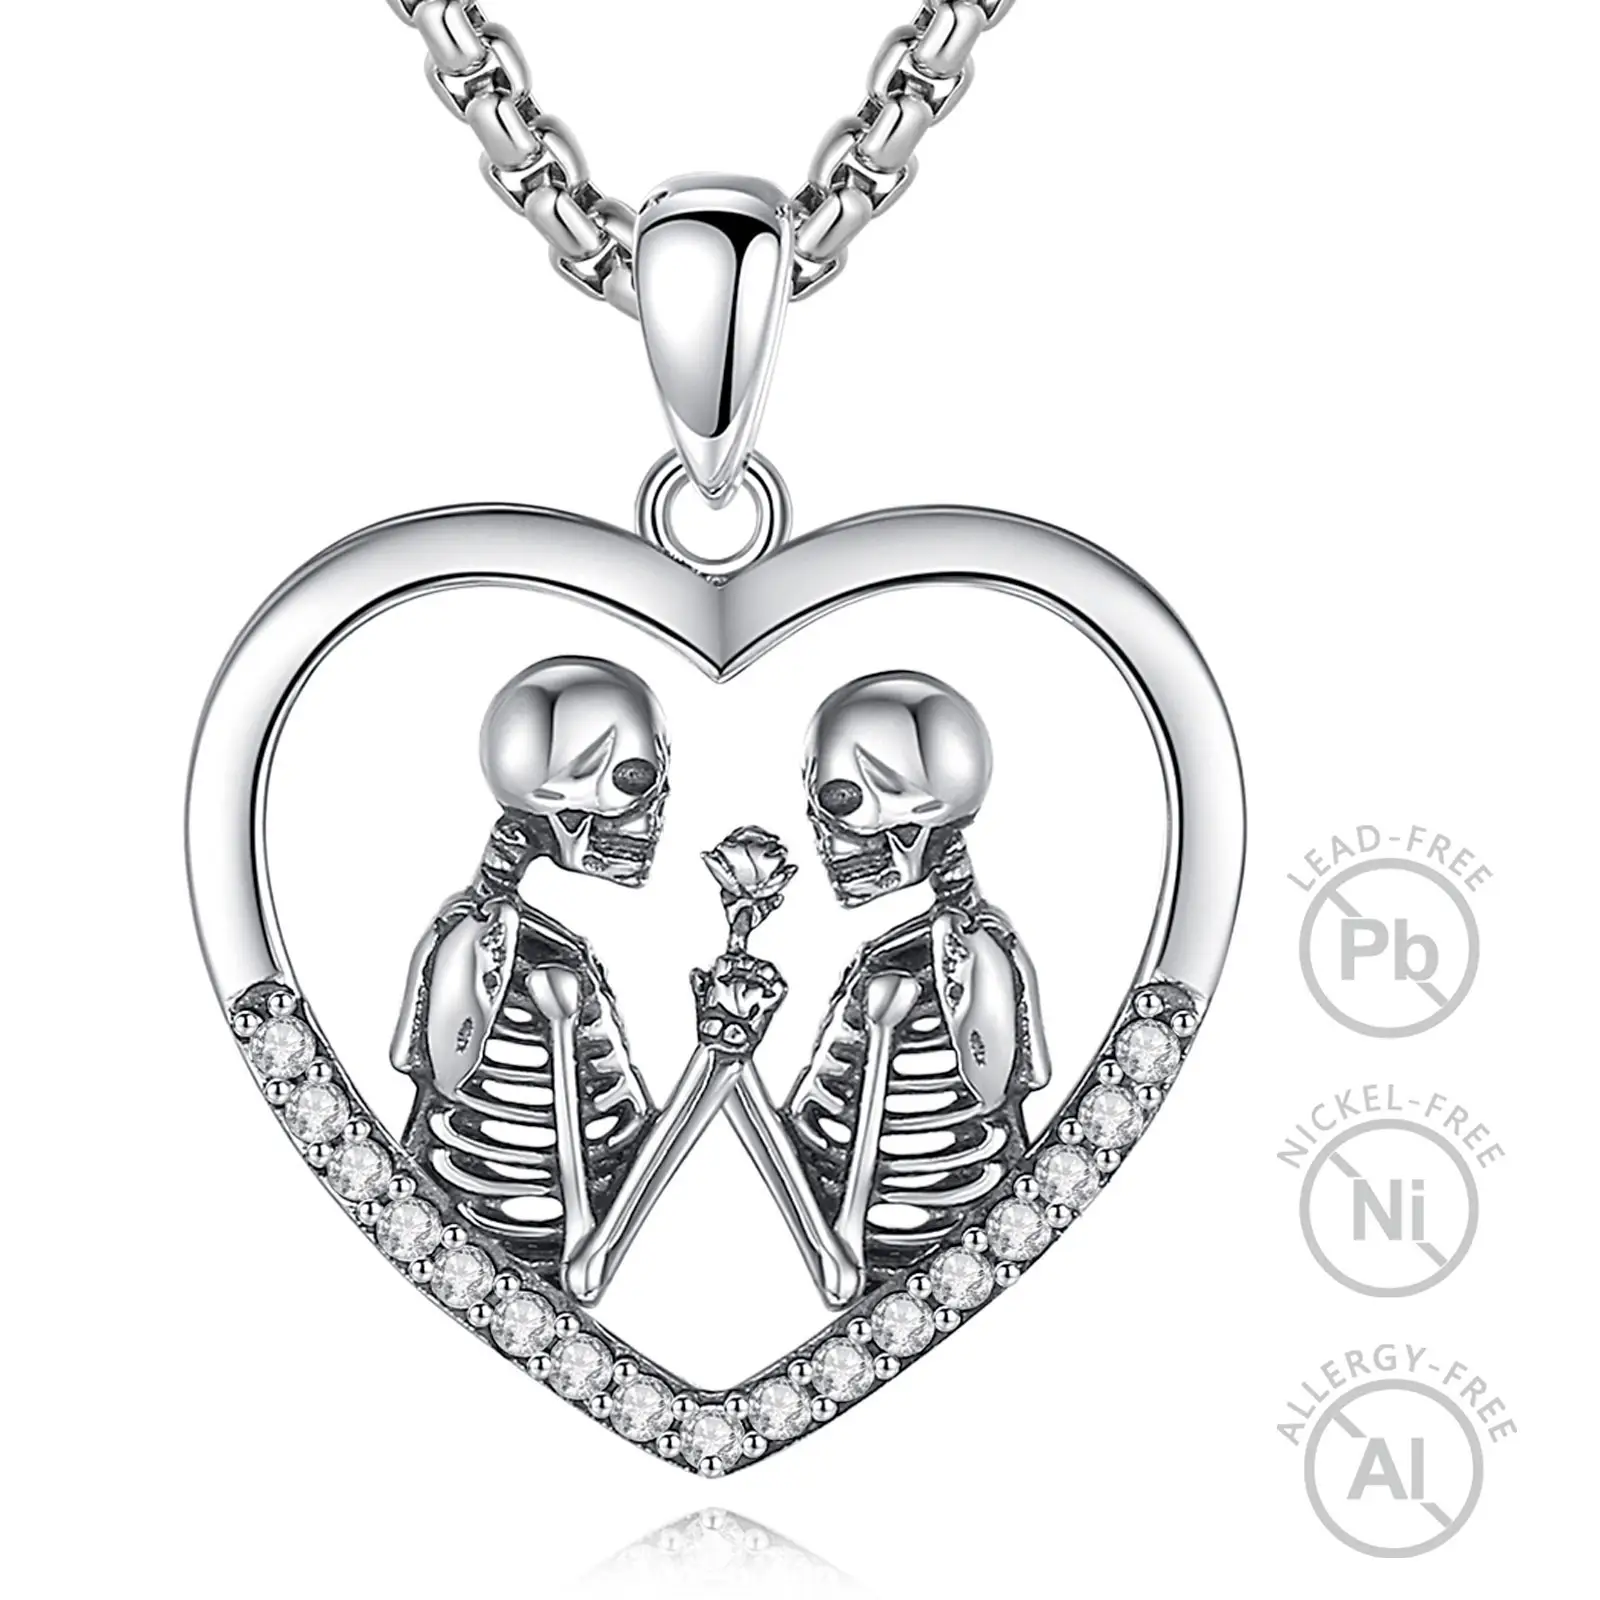 Merryshine Halloween gift vintage 925 Sterling silver gothic jack and sally heart lover skeleton skull necklace for girlfriend